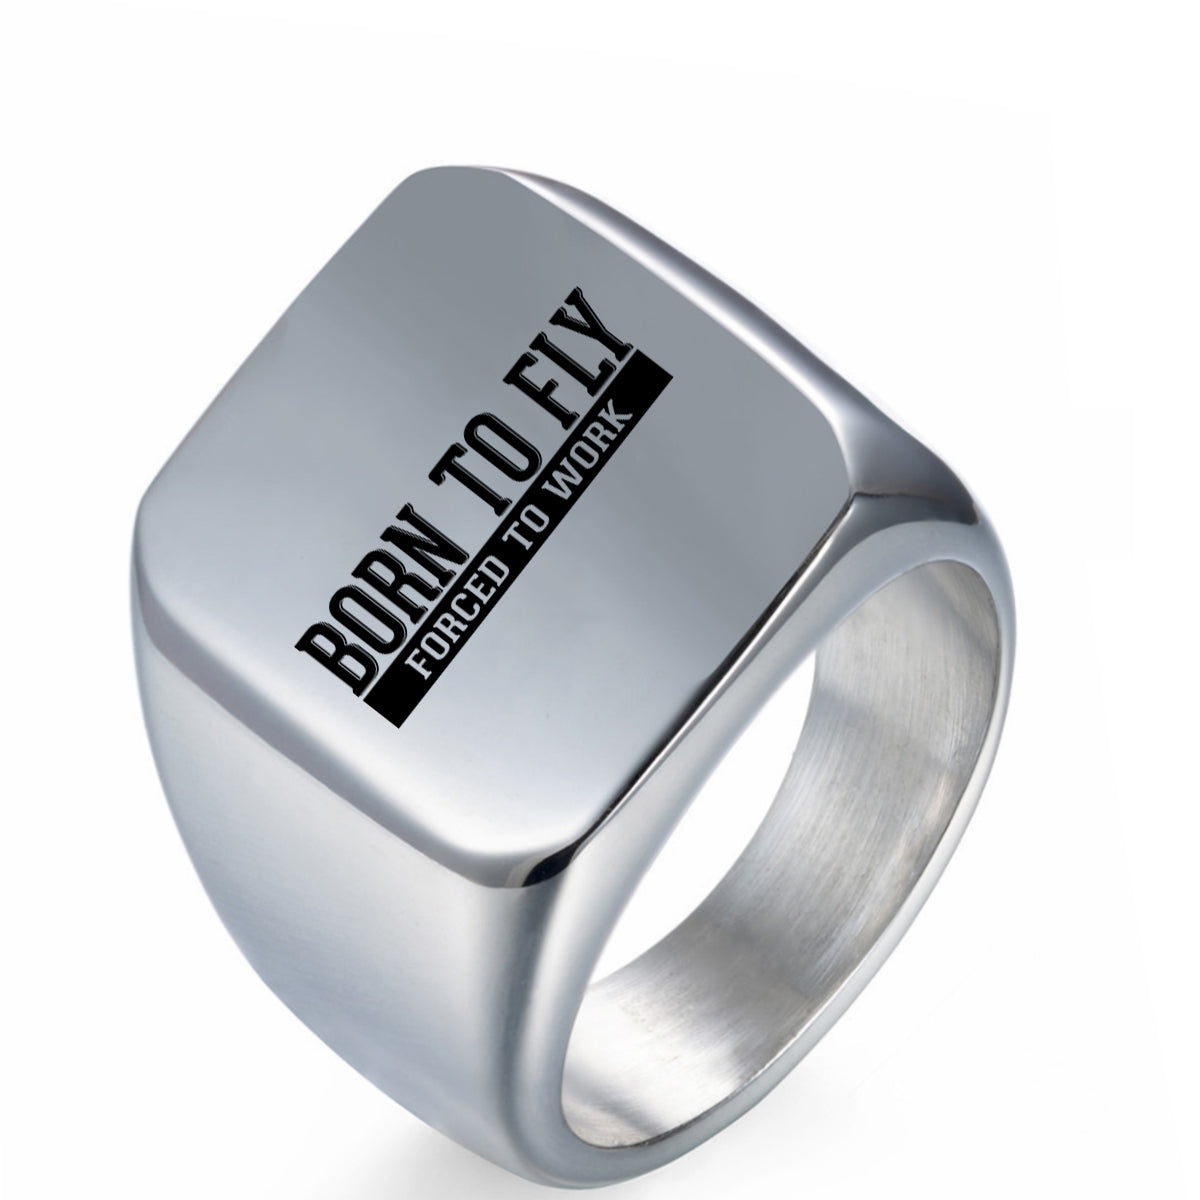 Born To Fly Forced To Work Designed Men Rings